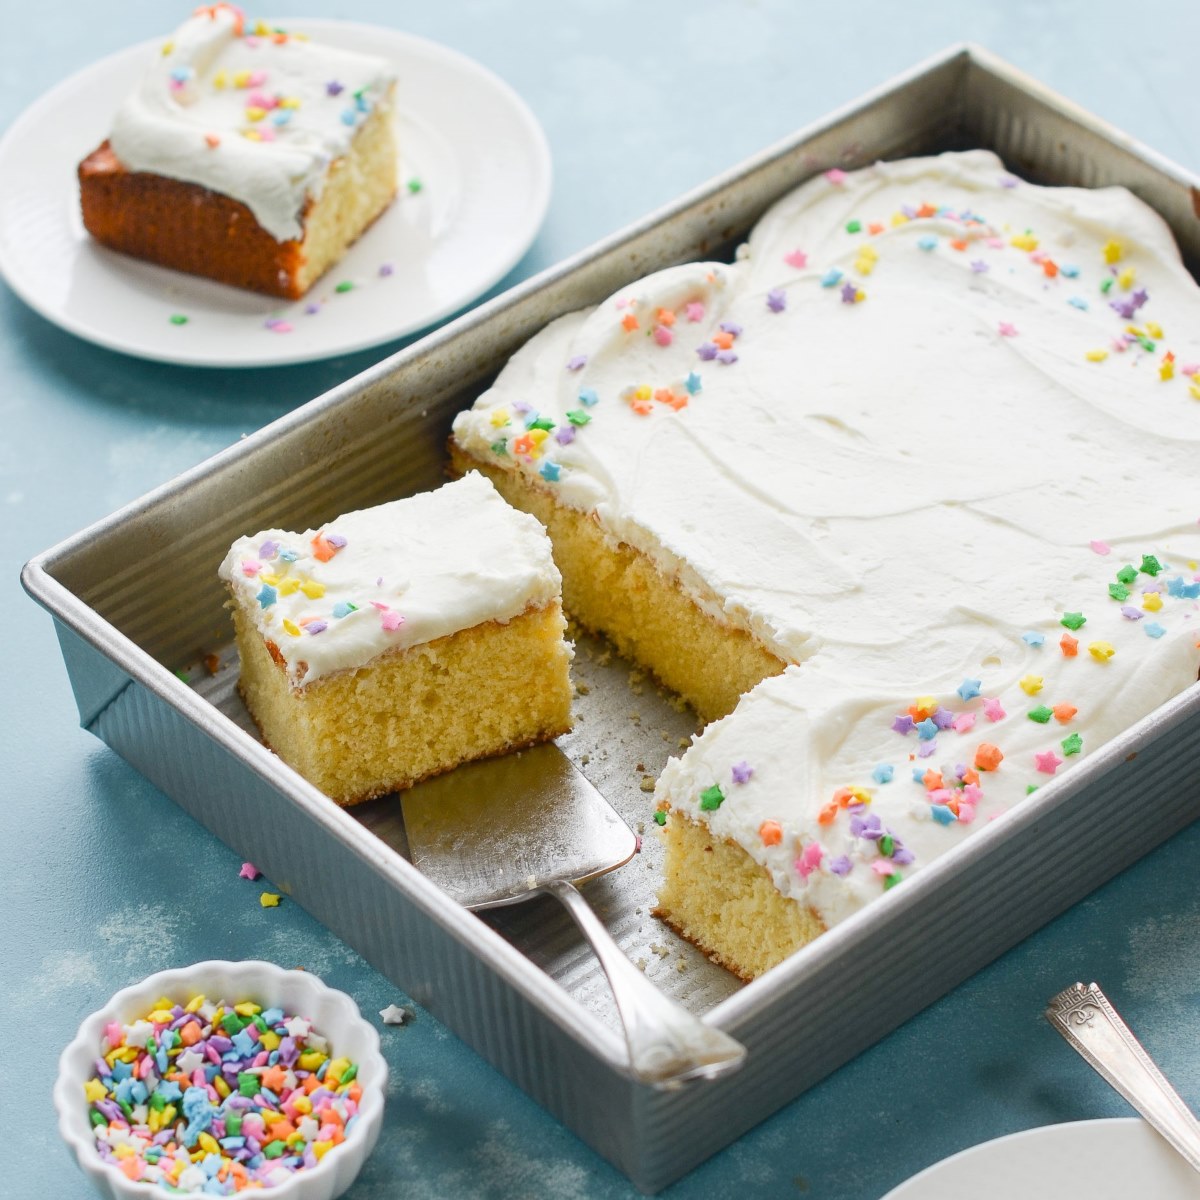 How To Store A Cake With Cream Cheese Frosting